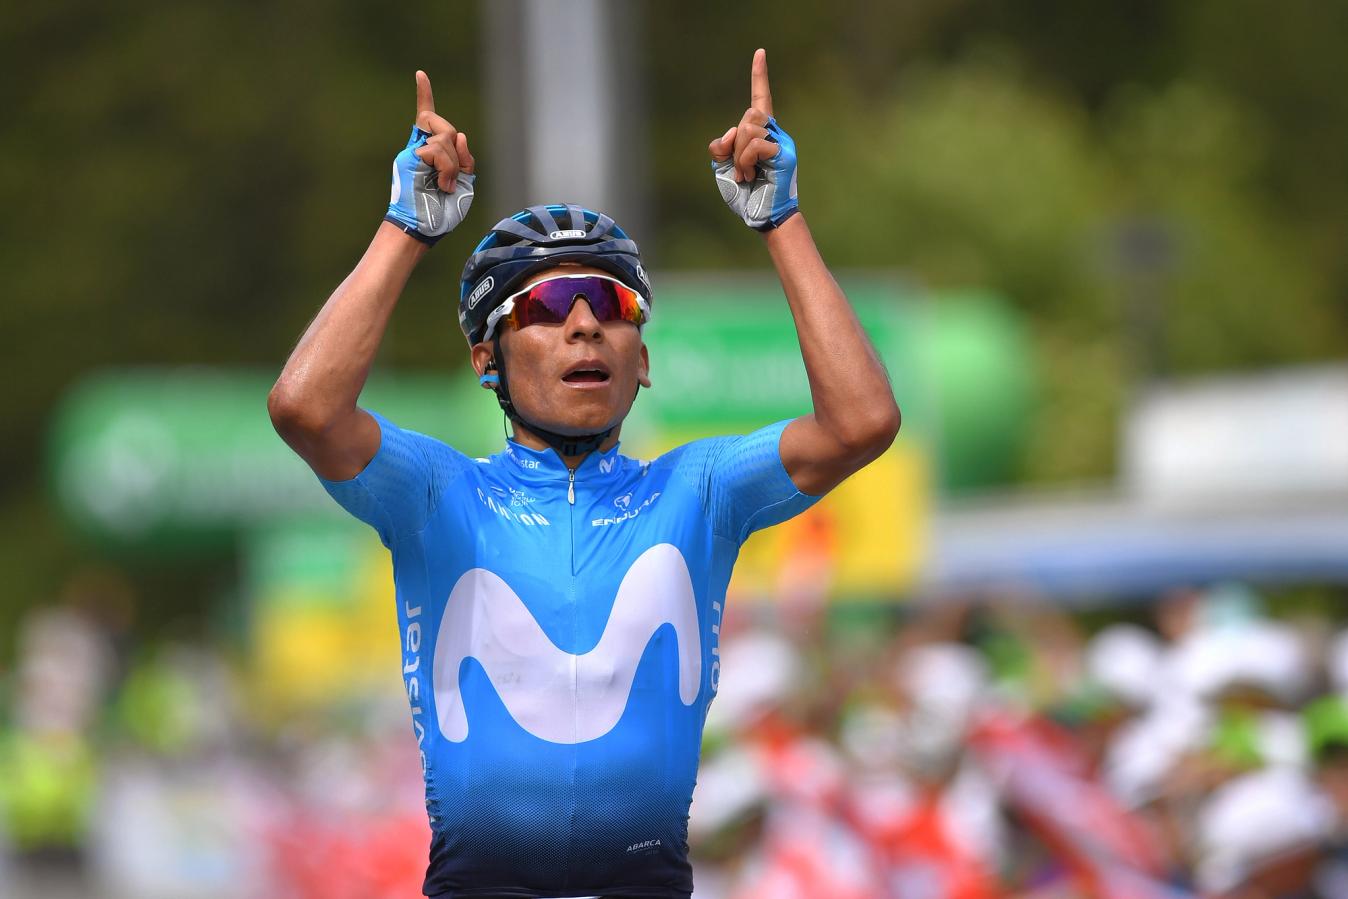 Nairo Quintana's homecoming to Movistar will be one of the most hotly-anticipated stories of the season